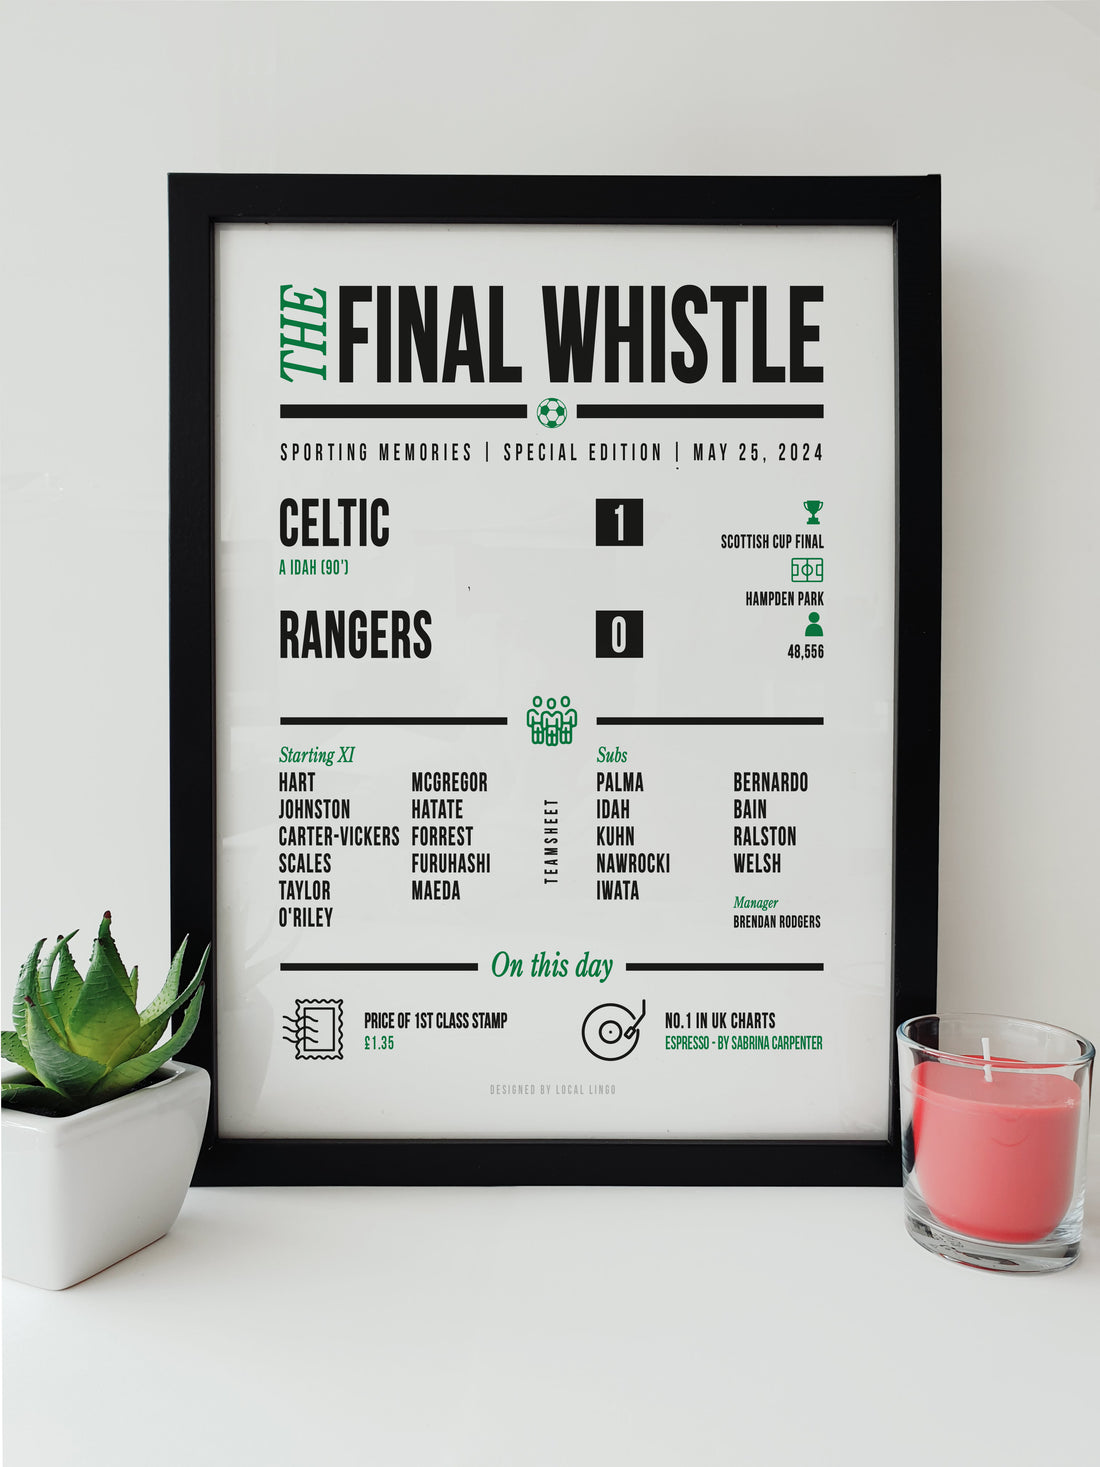 Celtic vs Rangers Scottish Cup Final 2024 The Final Whistle Keepsake Print by Local Lingo, featuring detailed match information in black and green text on a white background in a black frame.